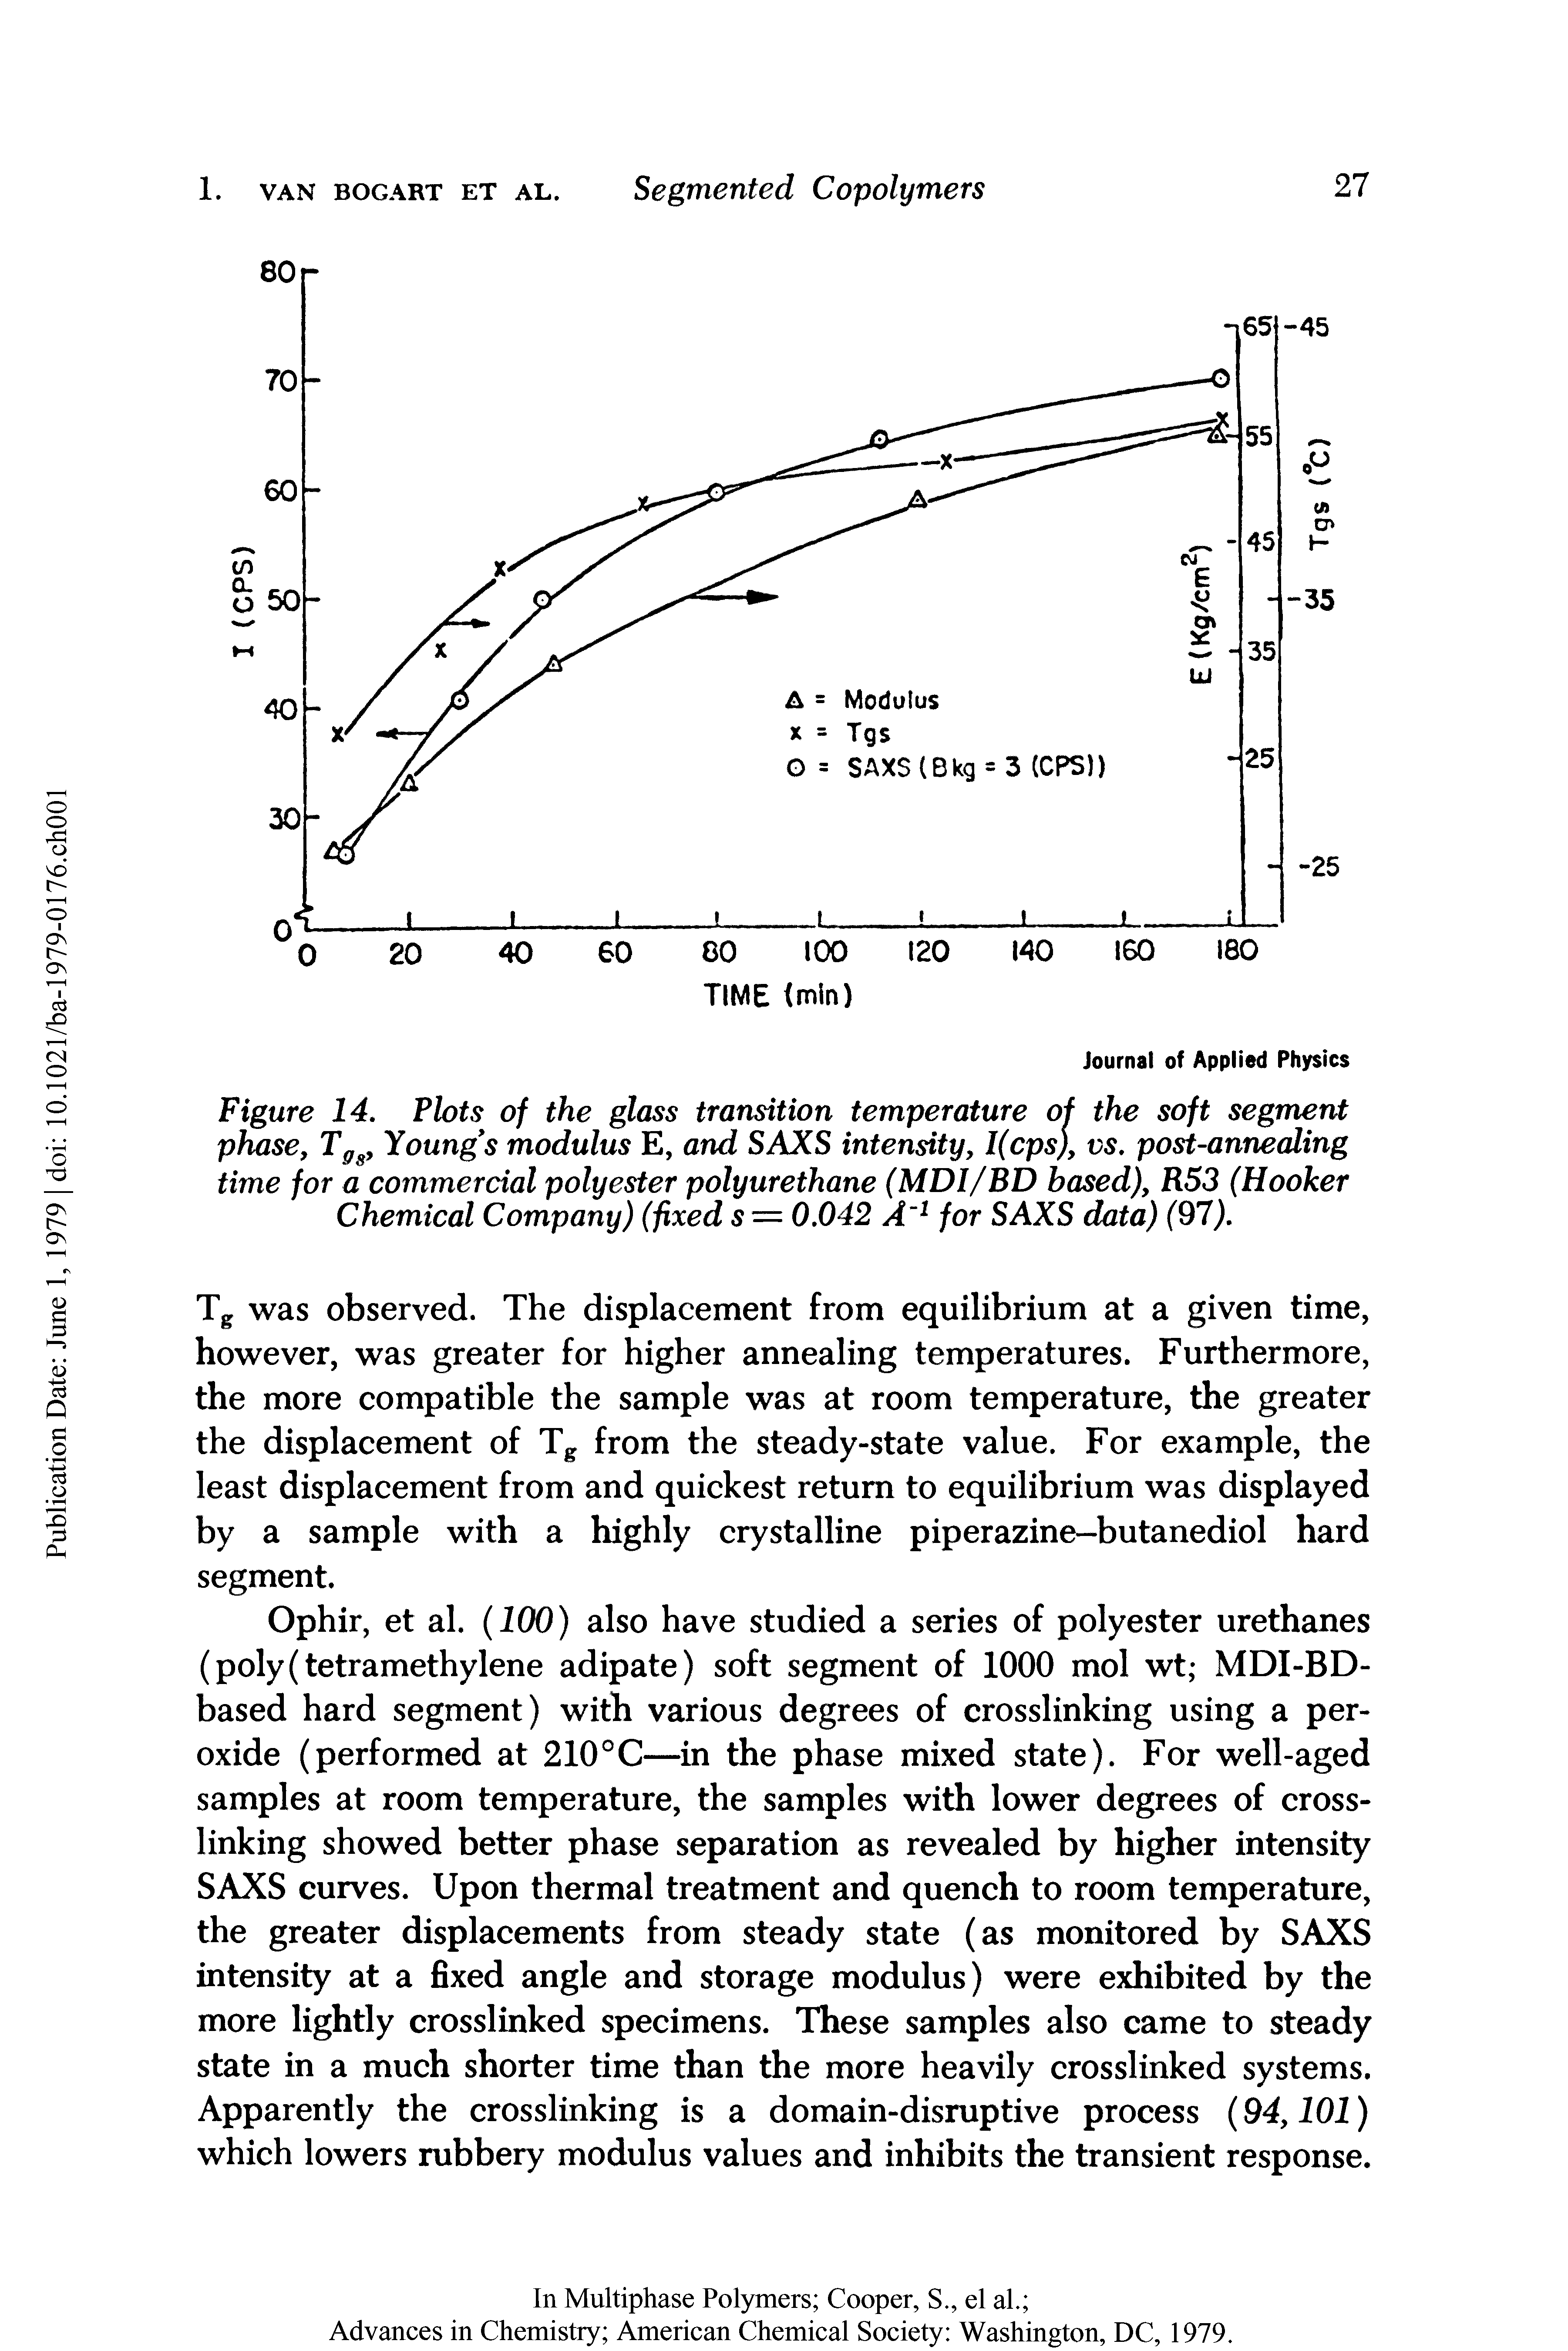 Figure 14. Plots of the glass transition temperature of the soft segment phase, Tffs, Young s modulus E, and SAXS intensity, l(cps), vs. post-annealing time for a commercial polyester polyurethane (MDI/BD based), R53 (Hooker Chemical Company) (fixed s = 0.042 A 1 for SAXS data) (97).